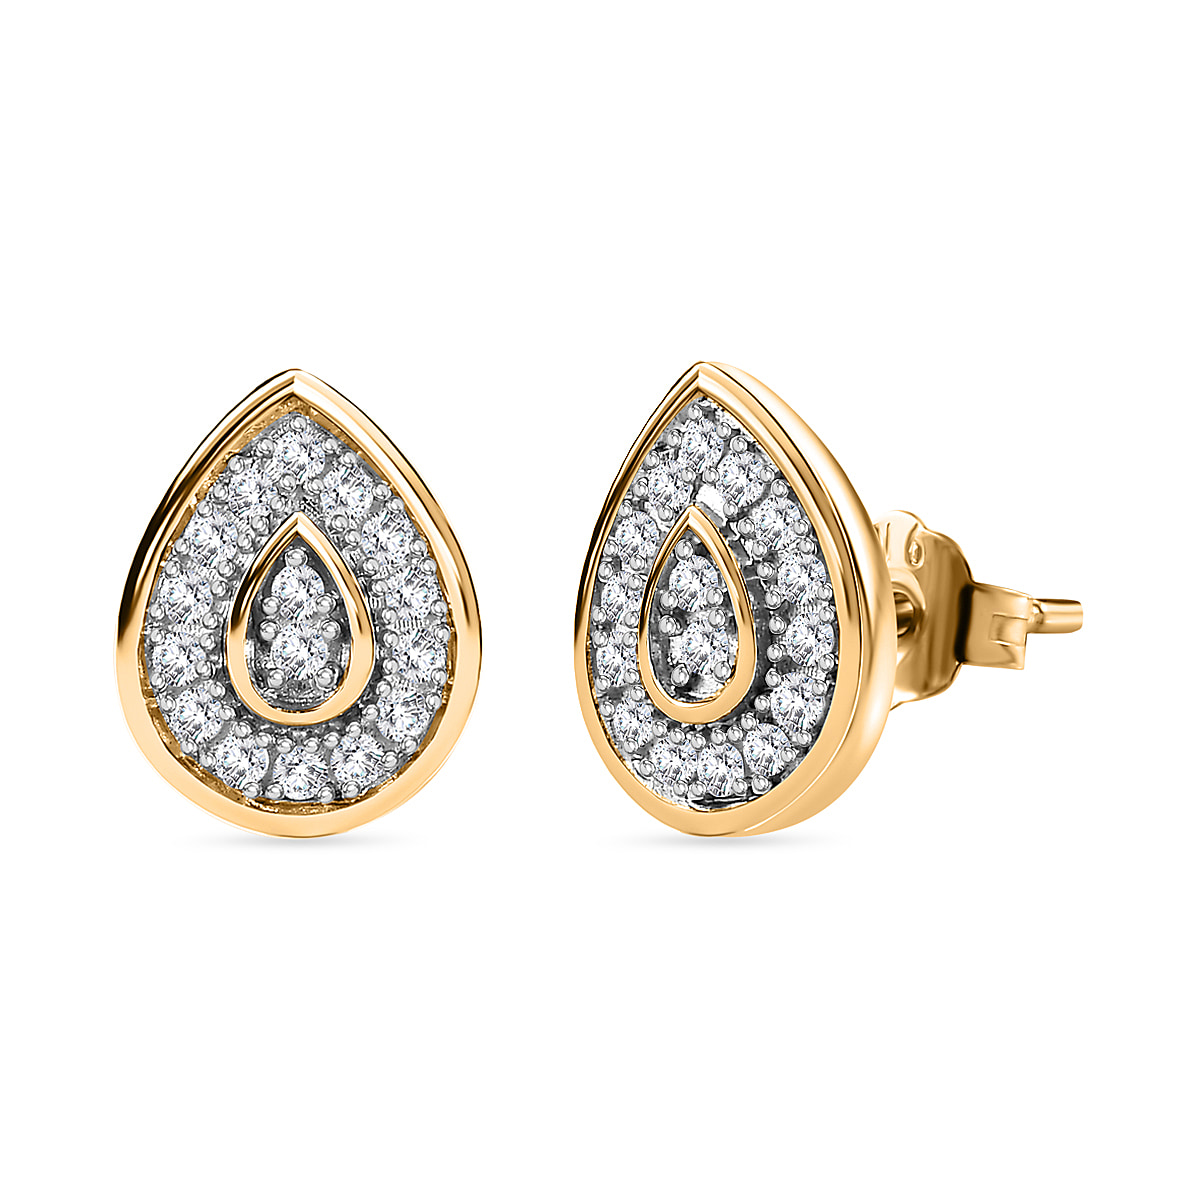 TLV Your Choice - 9K Yellow Gold Natural White Diamond Earrings 0.20 Ct - Pear